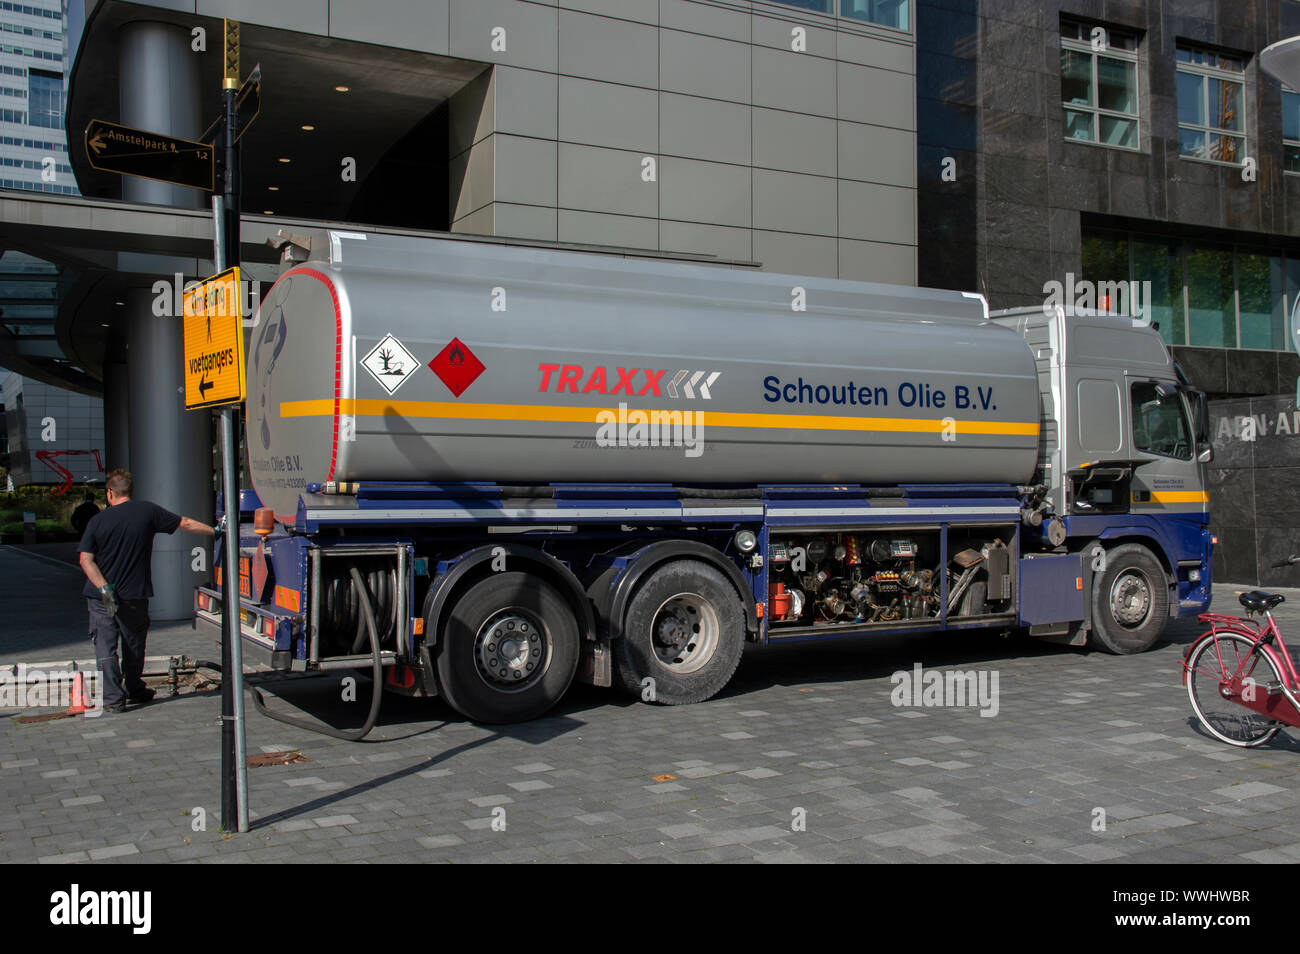 Traxx Truck At Amsterdam The Netherlands 2019 Stock Photo